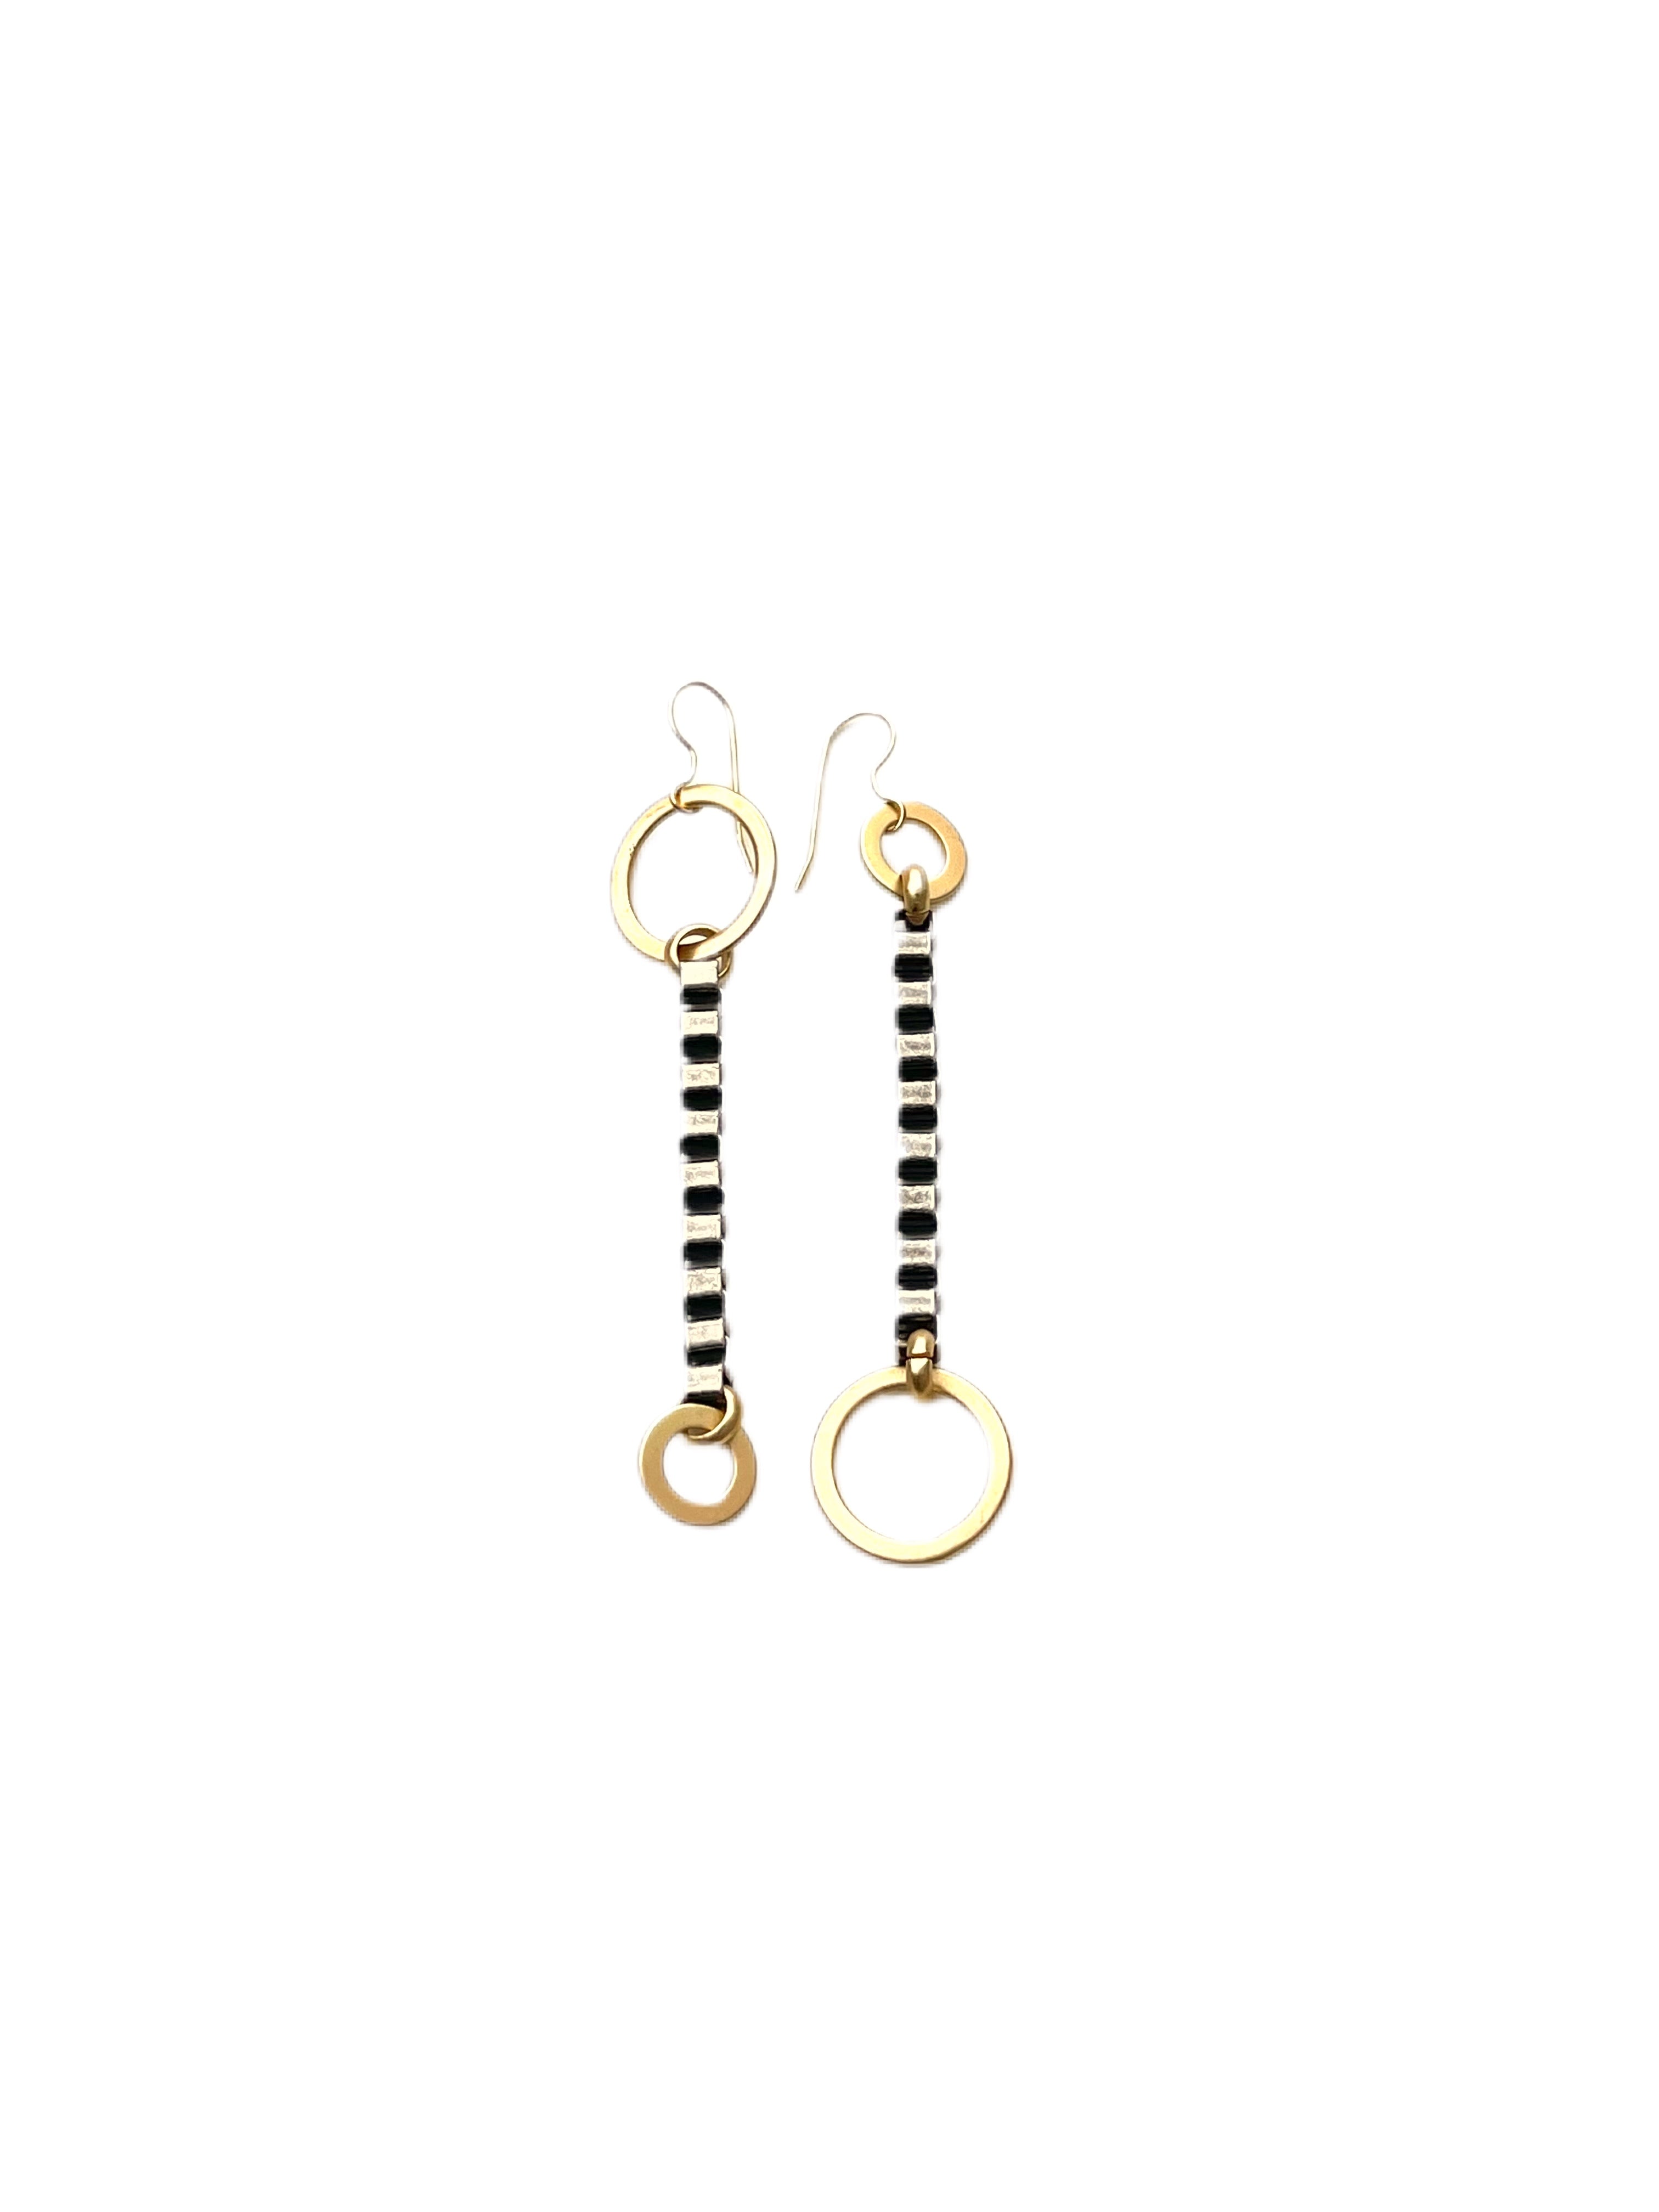 Dylan - earrings with box chain and circle accents